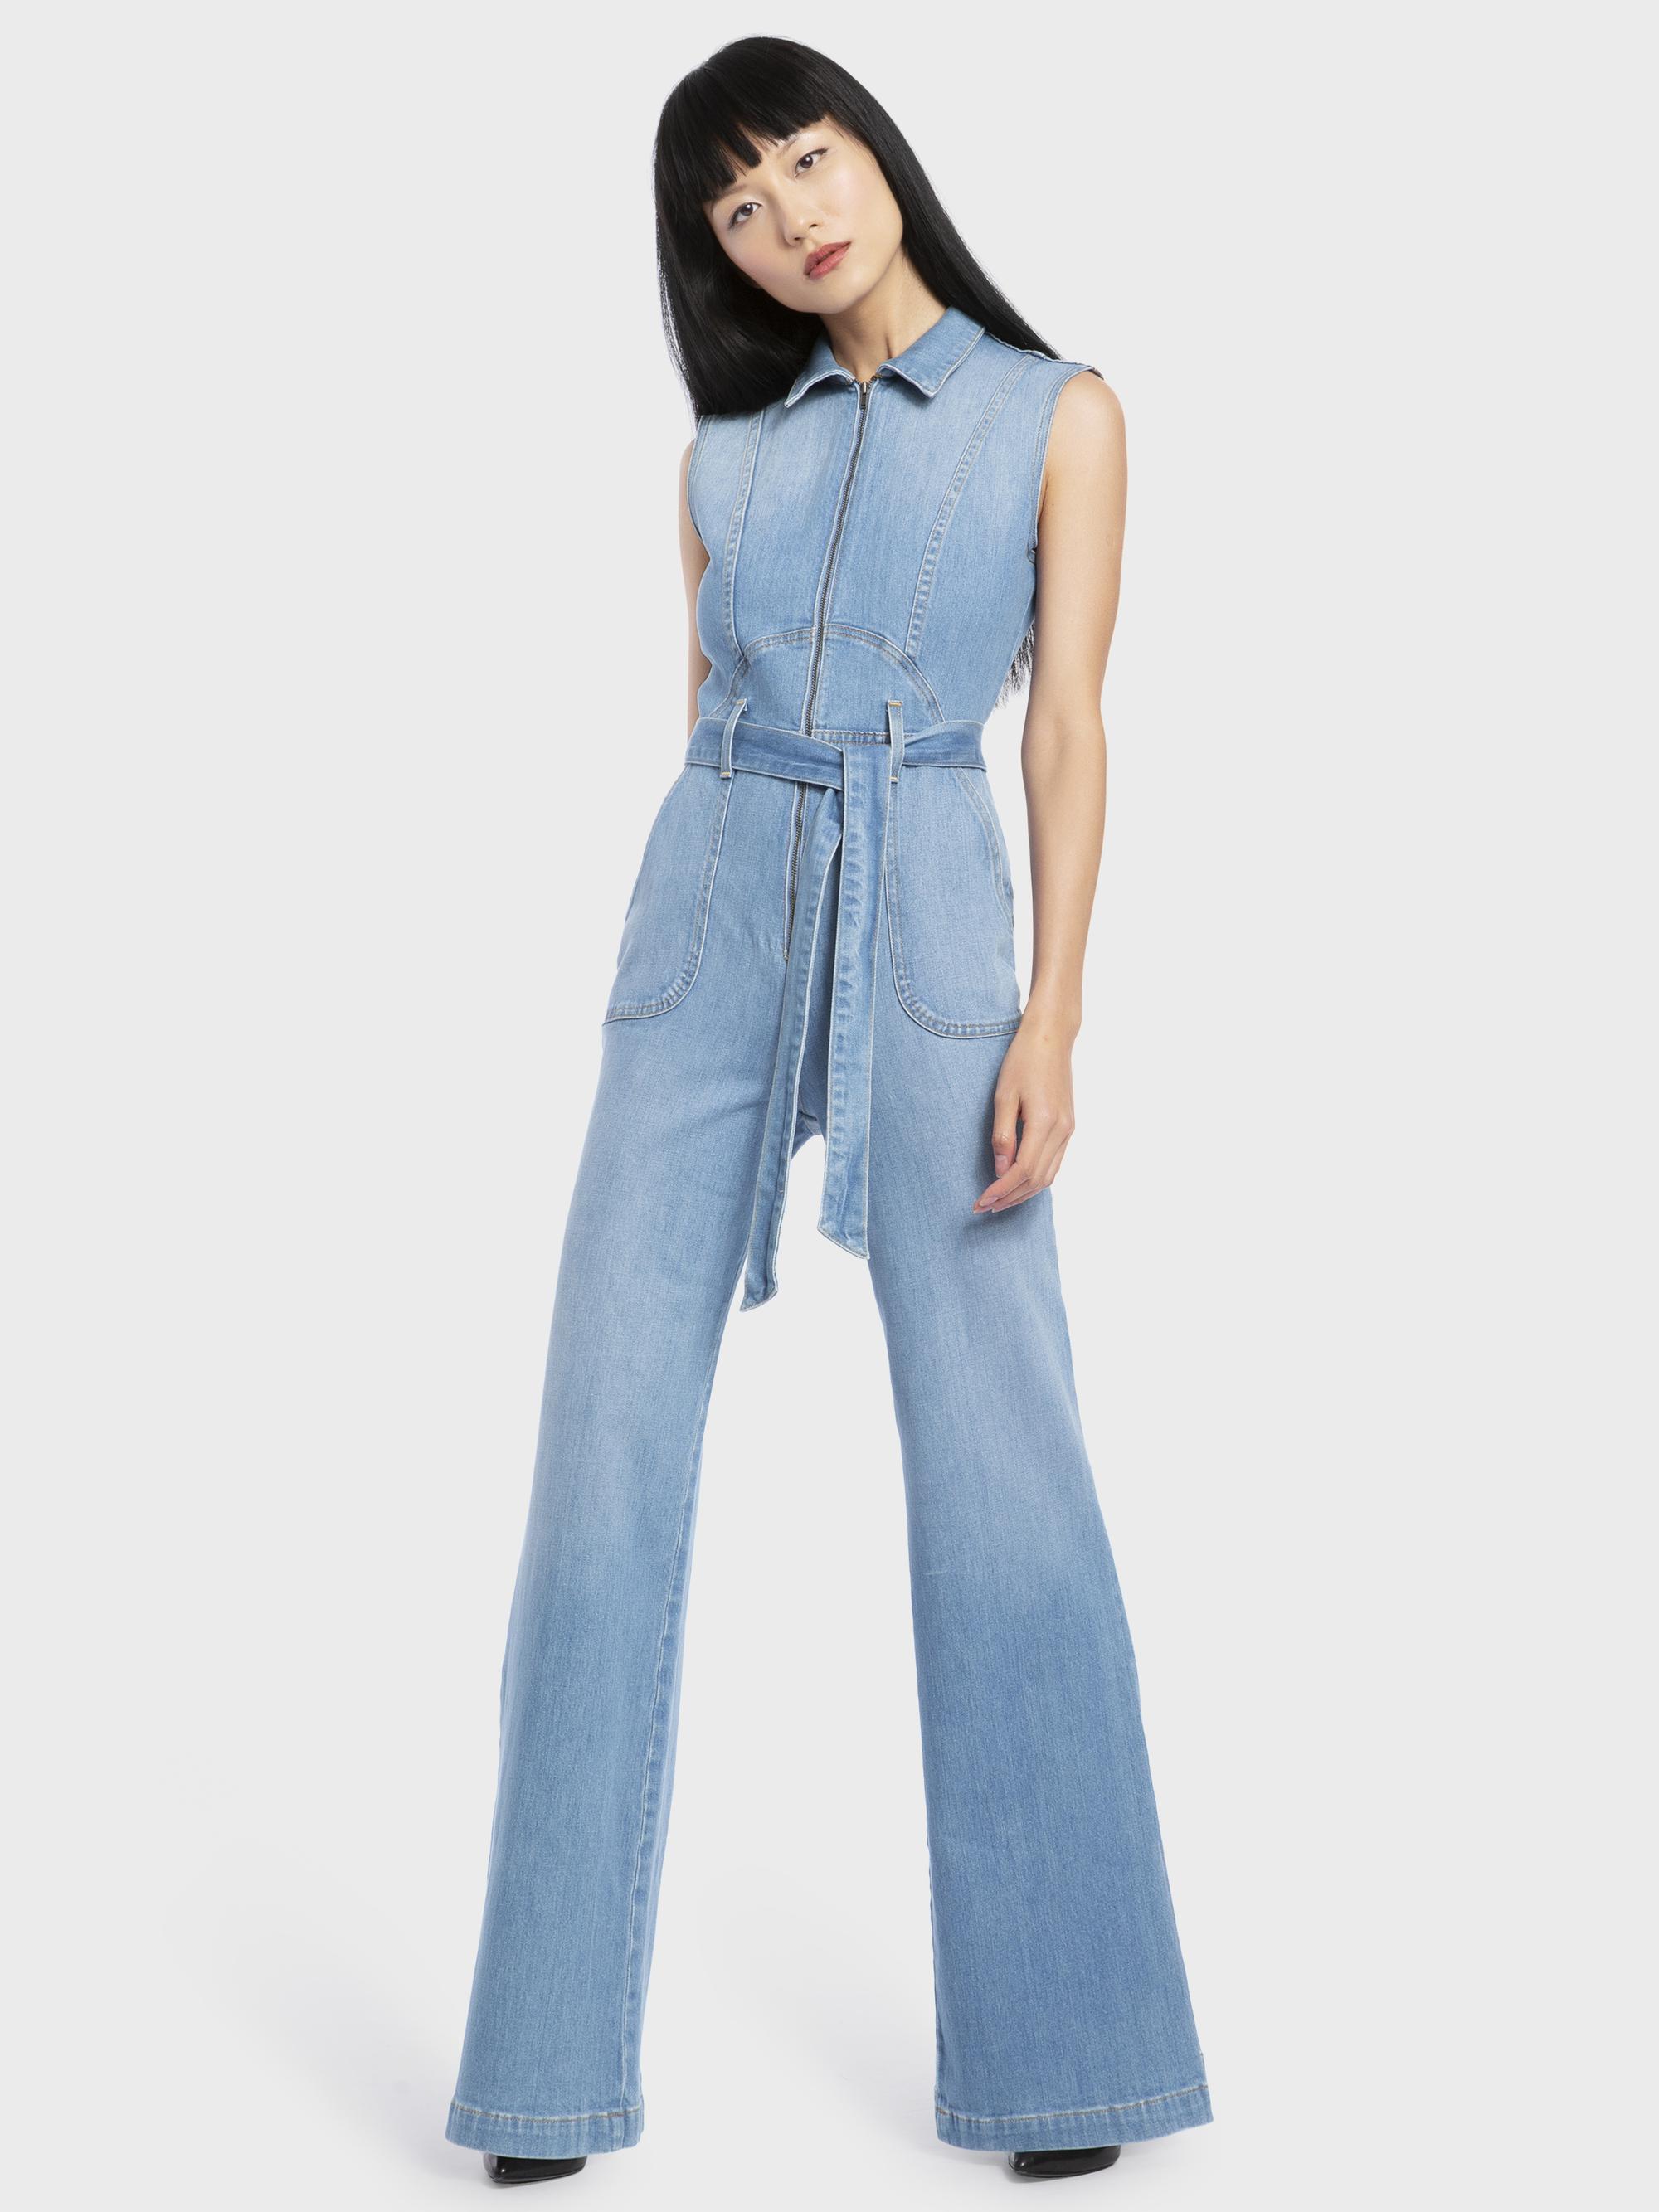 Lyst - Alice + Olivia Gorgeous Sexy 70's Jumpsuit in Blue